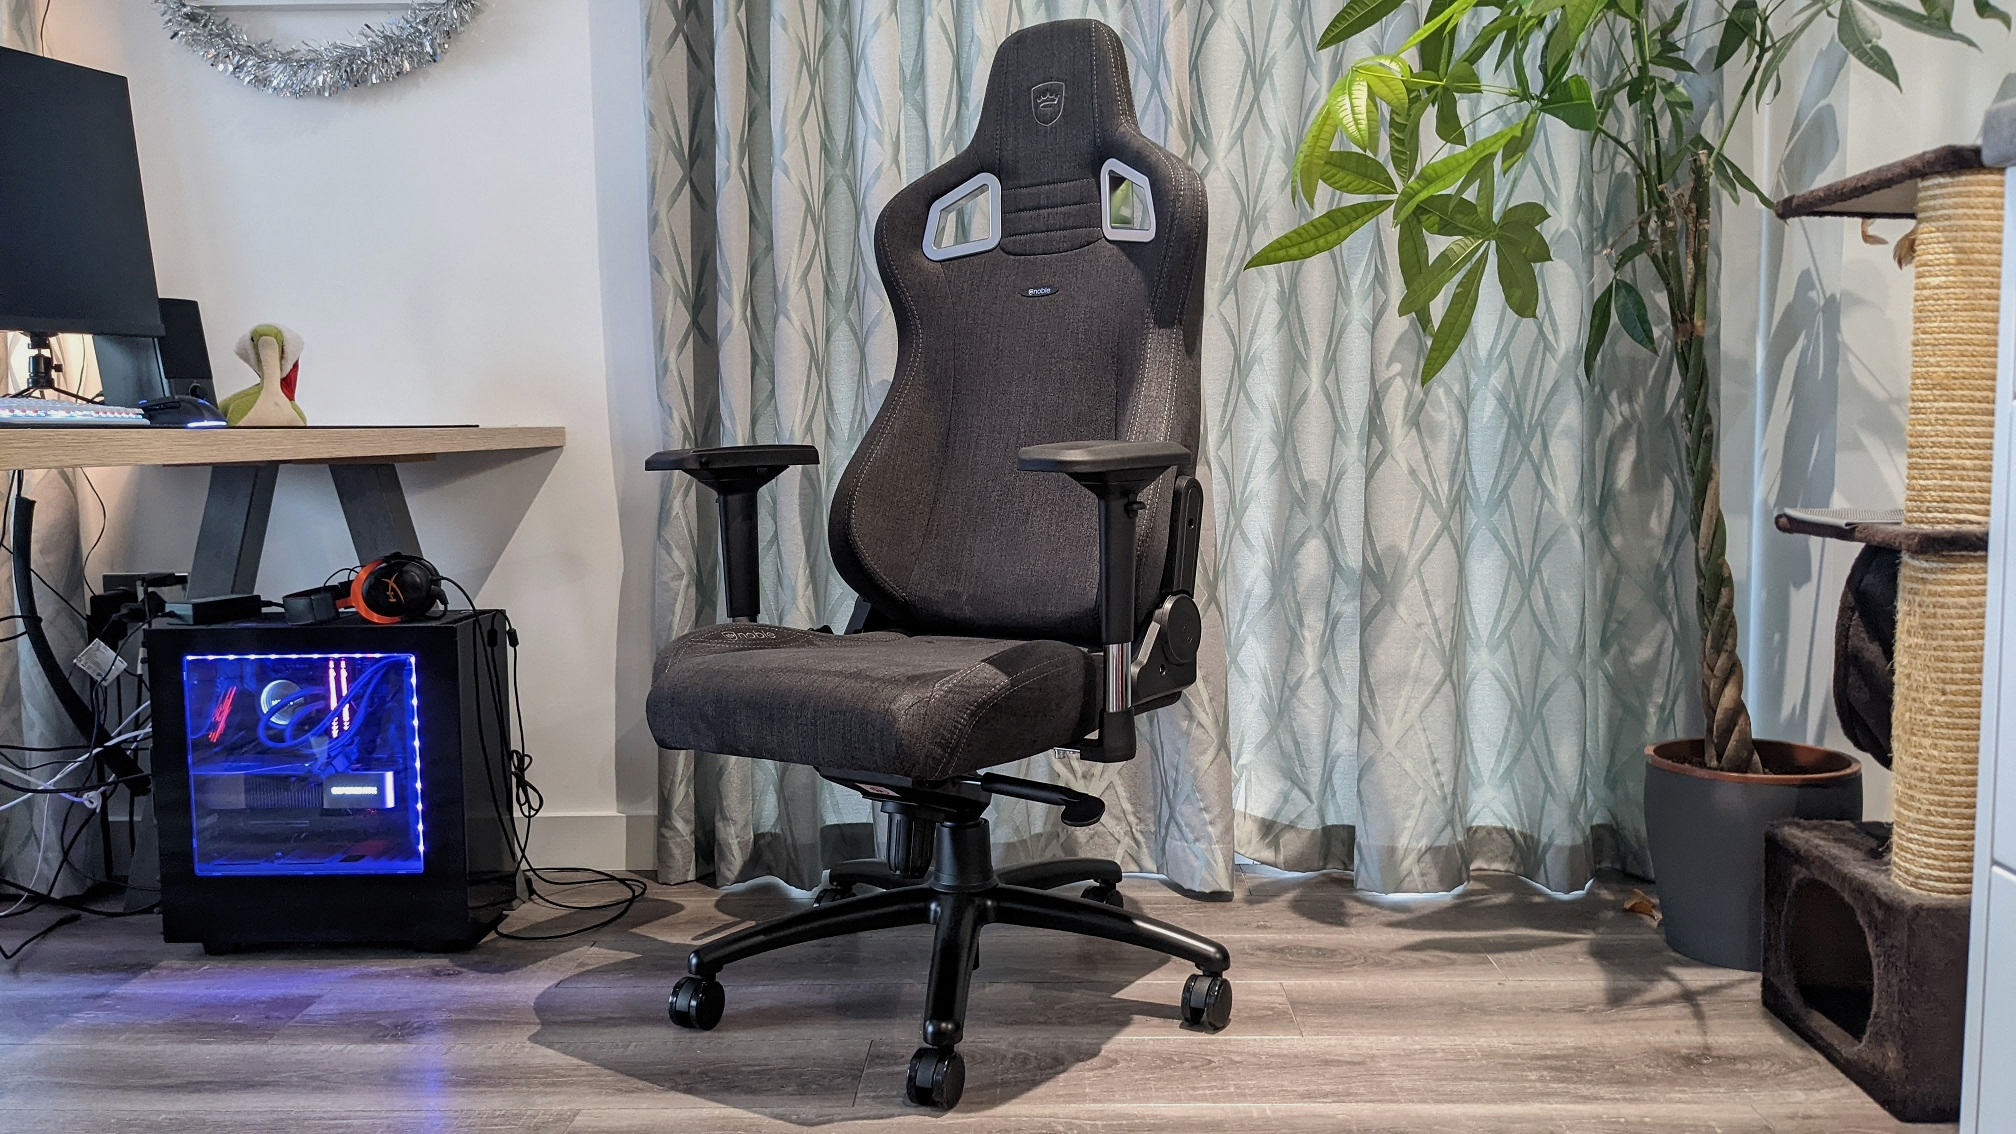 The Noblechairs Epic TX gaming chair, next to a desk.